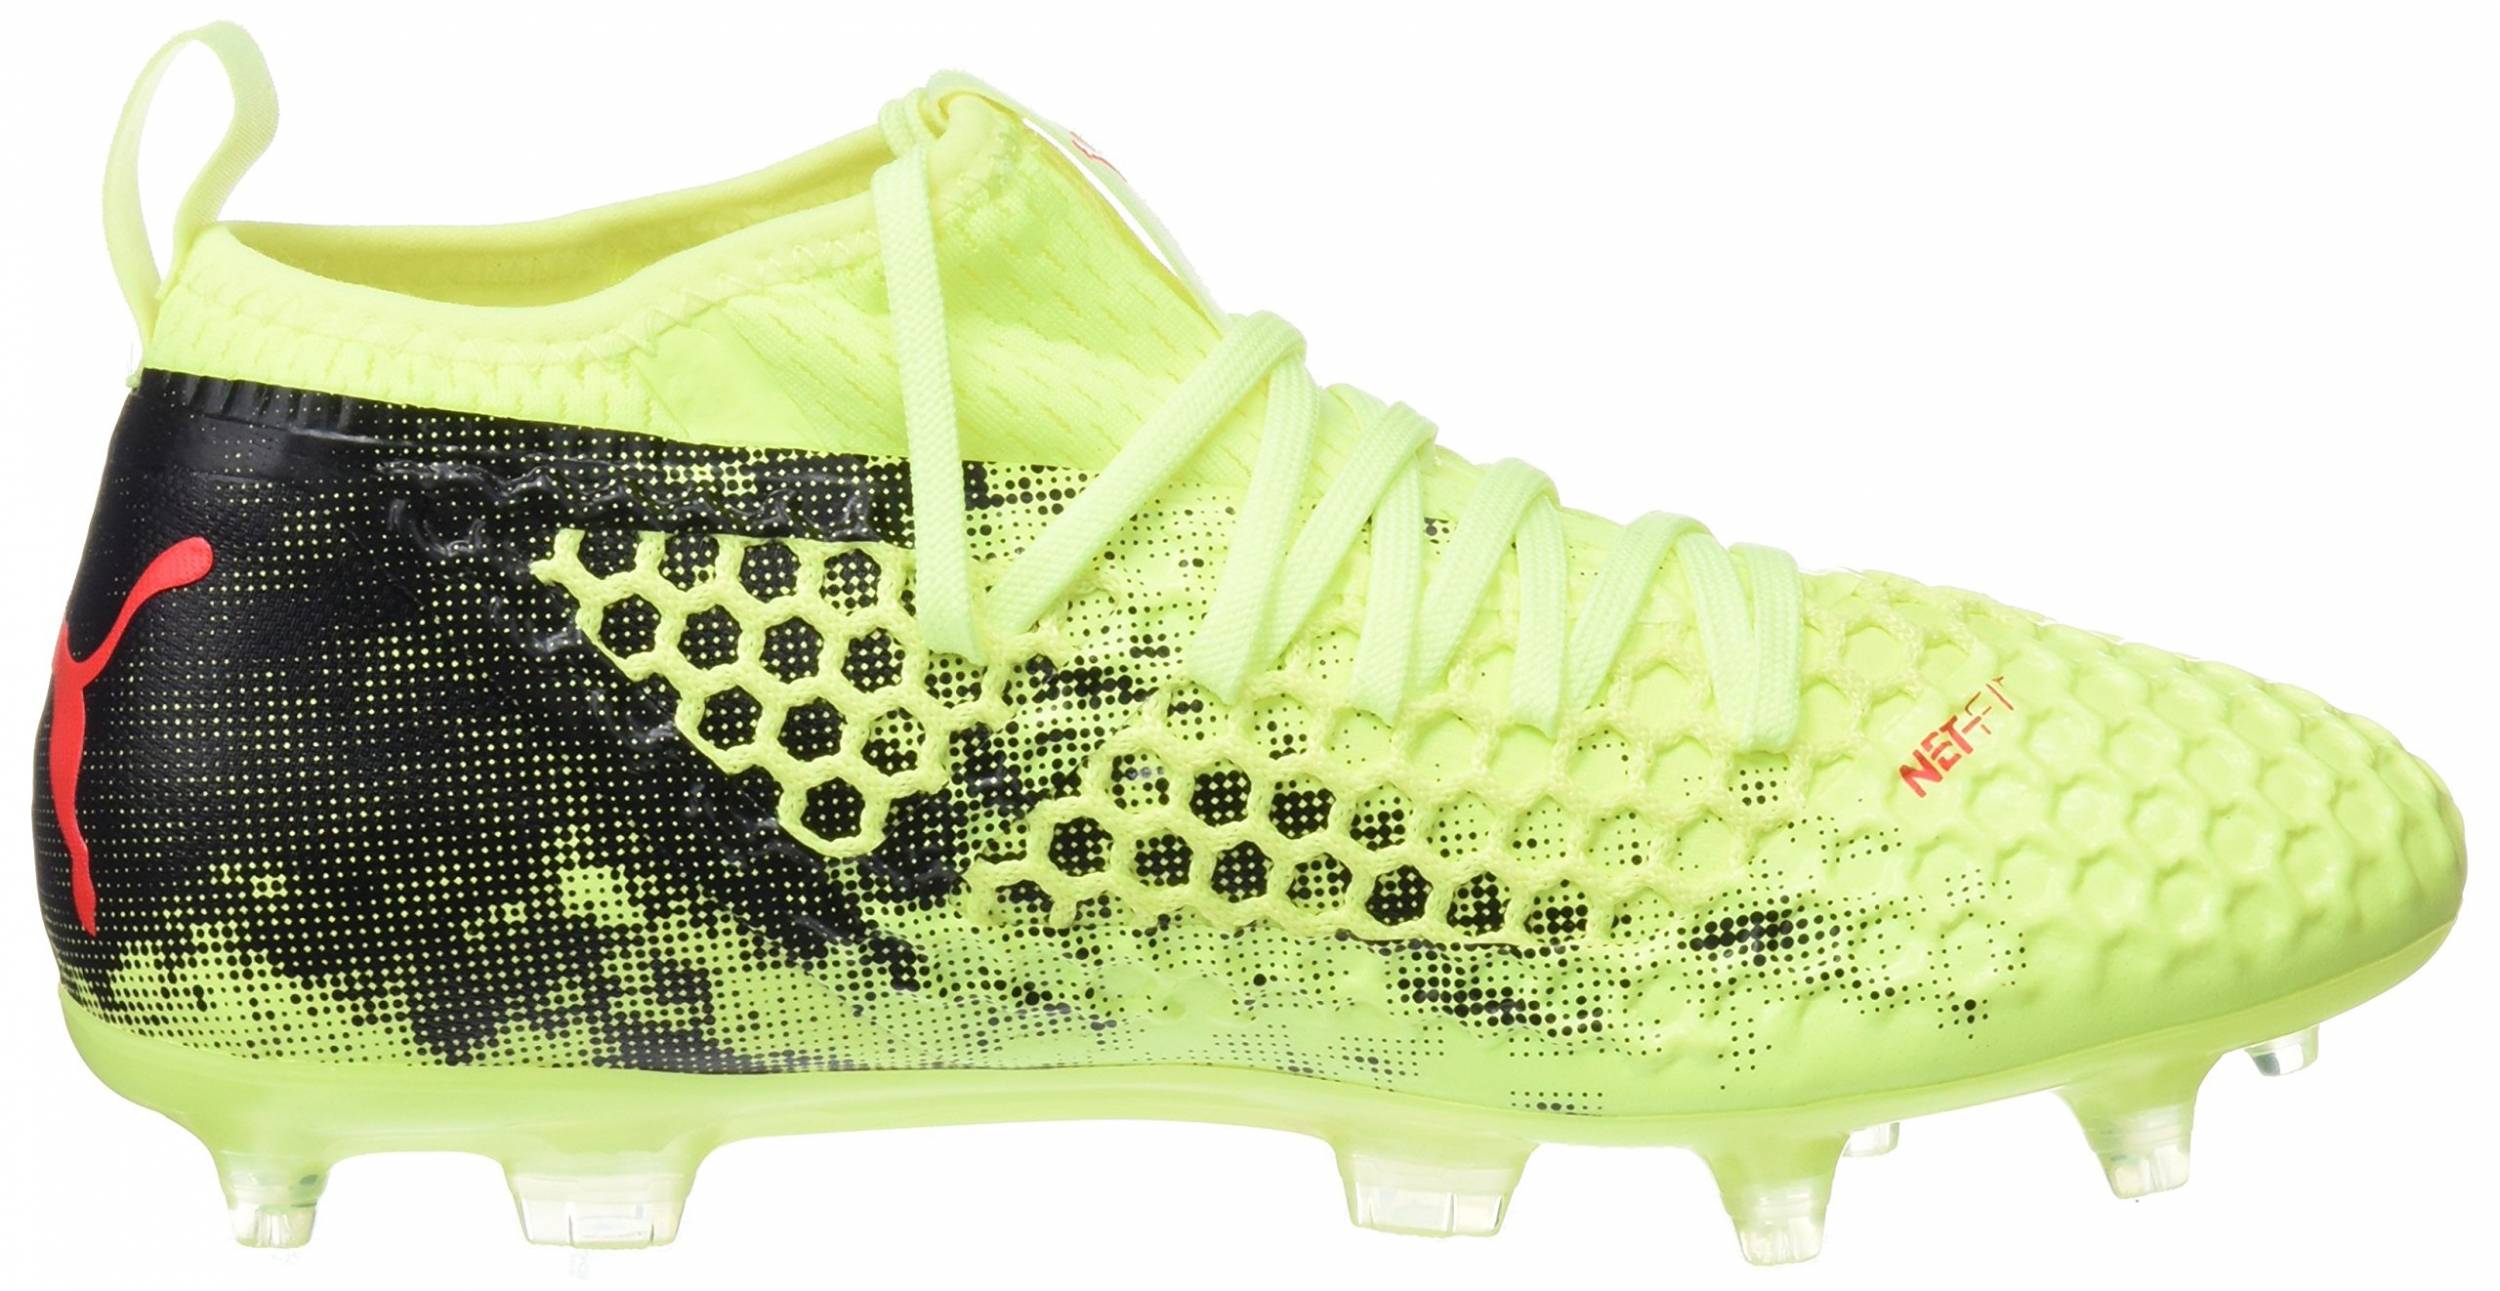 Save 51% on Puma Mid Top Soccer Cleats 